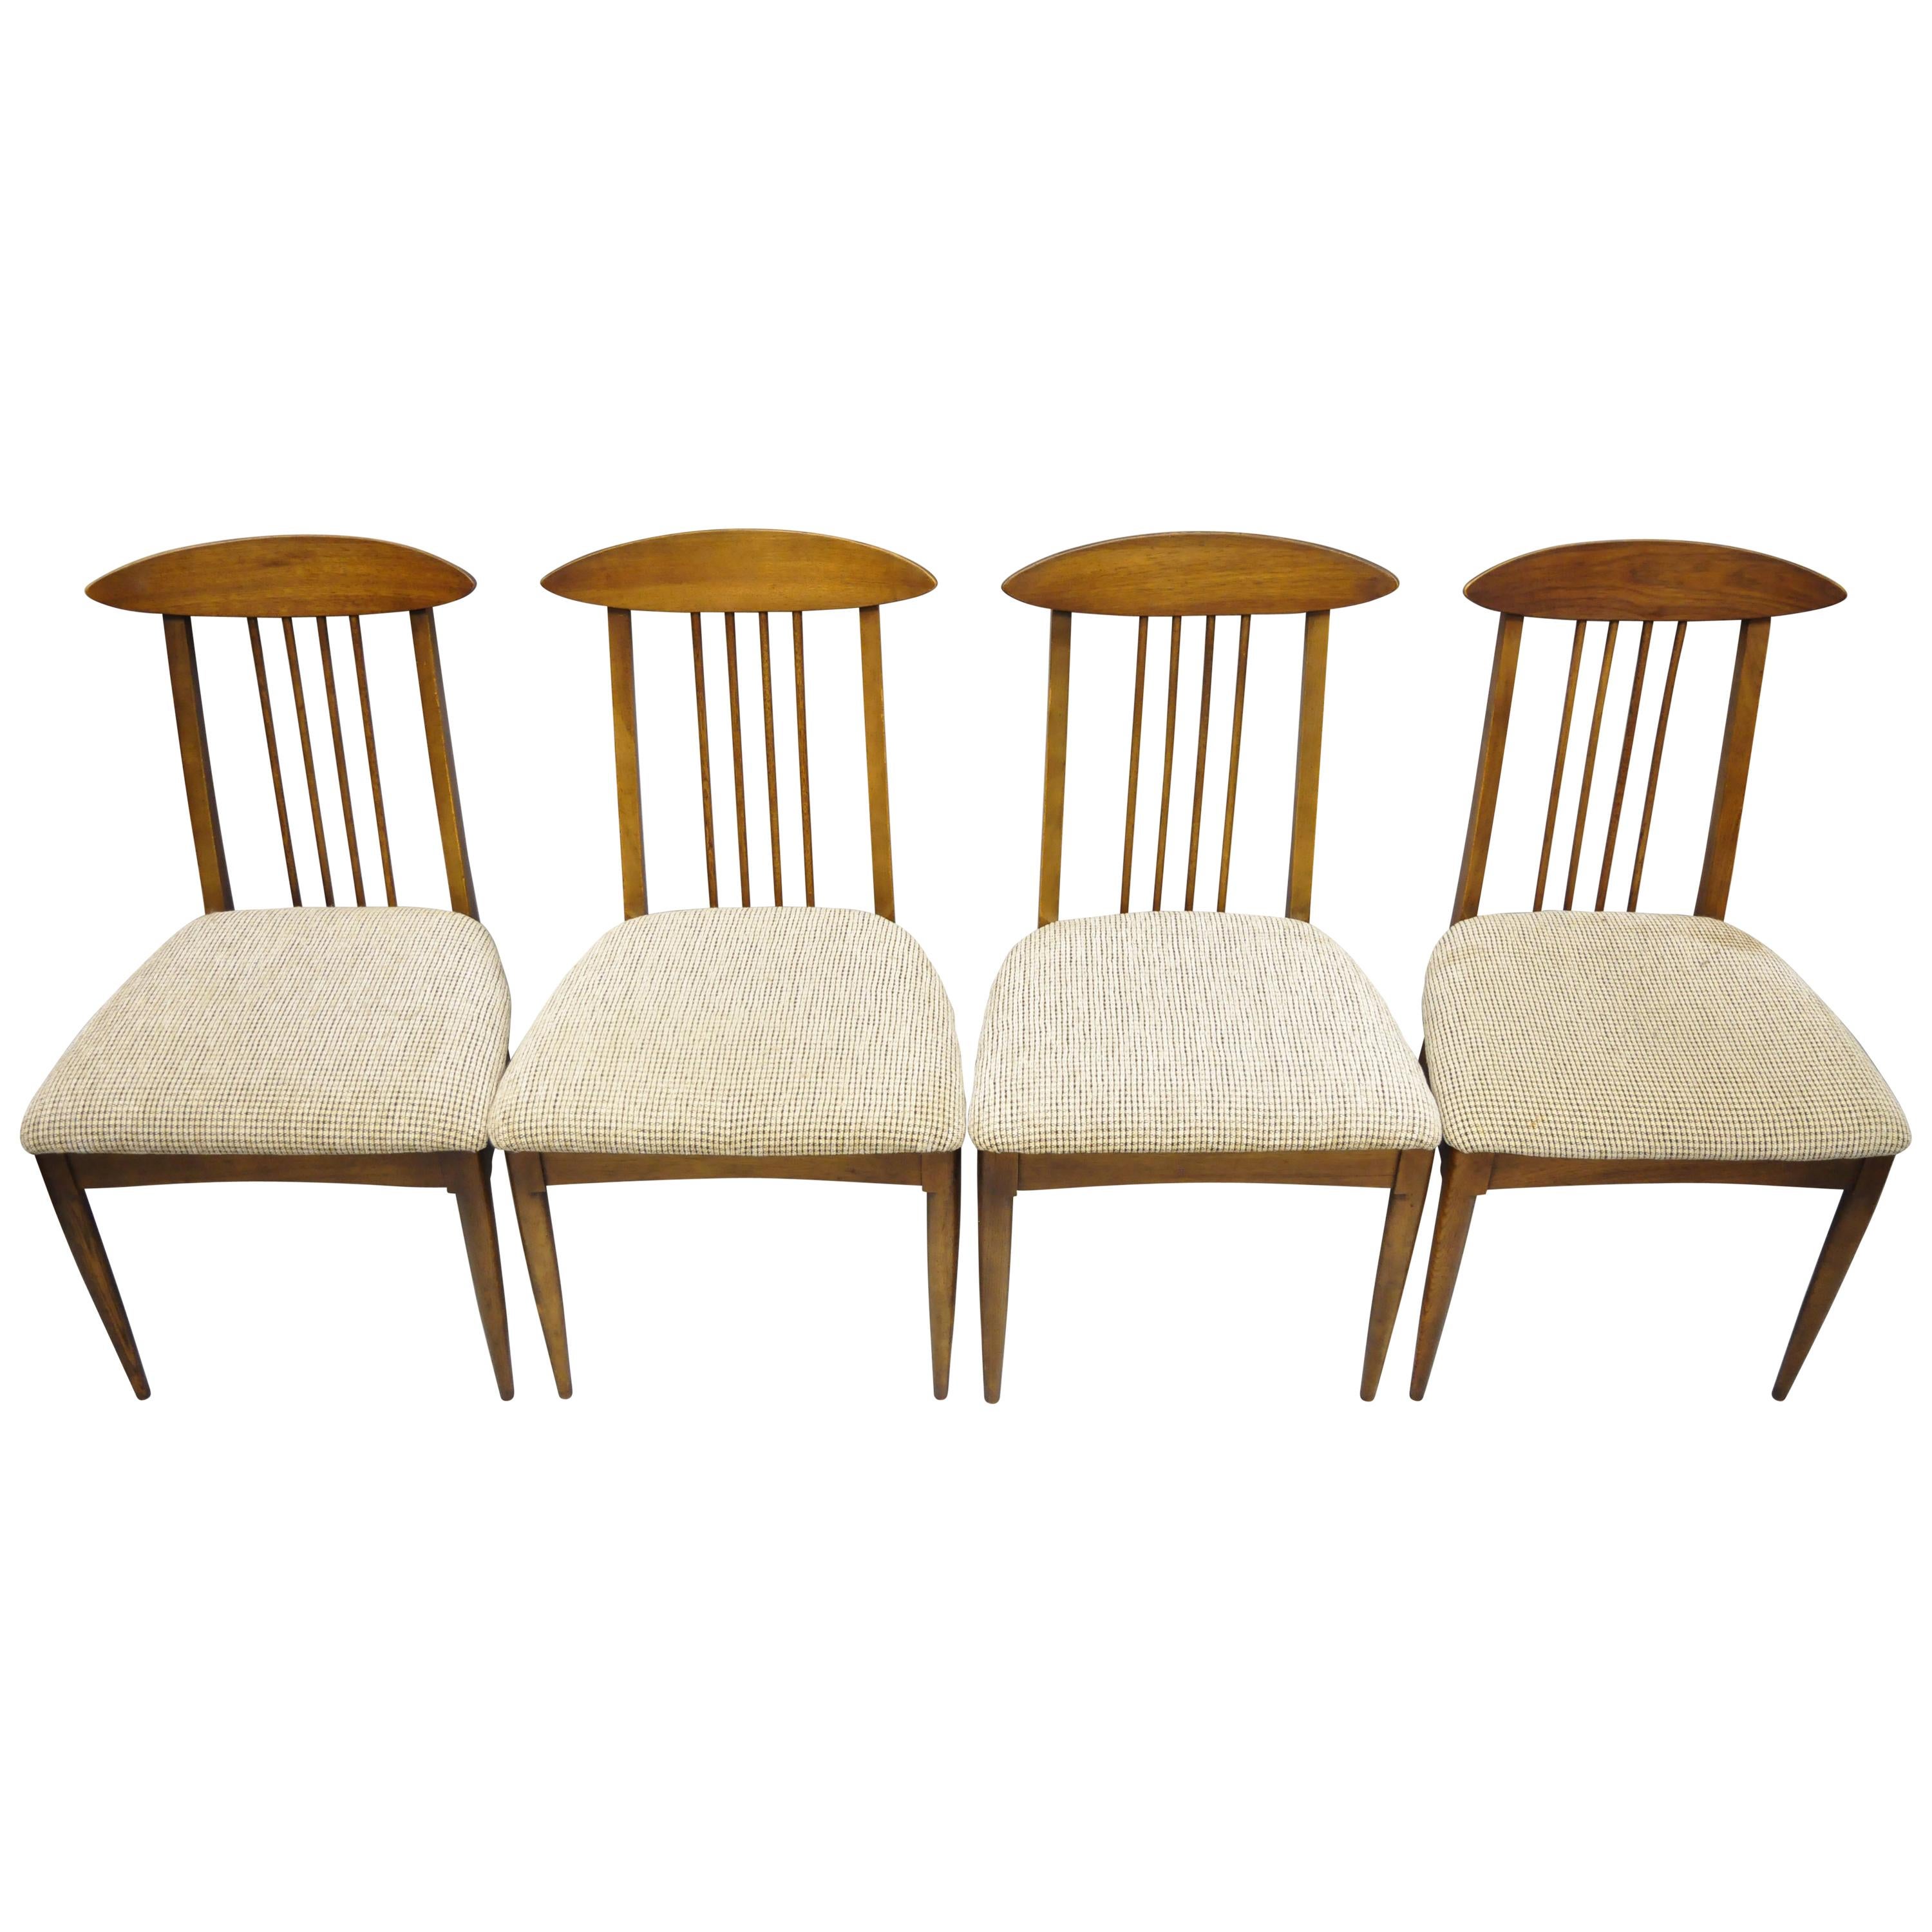 Set of Four Vintage Mid-Century Modern Walnut Spindle Back Dining Chairs